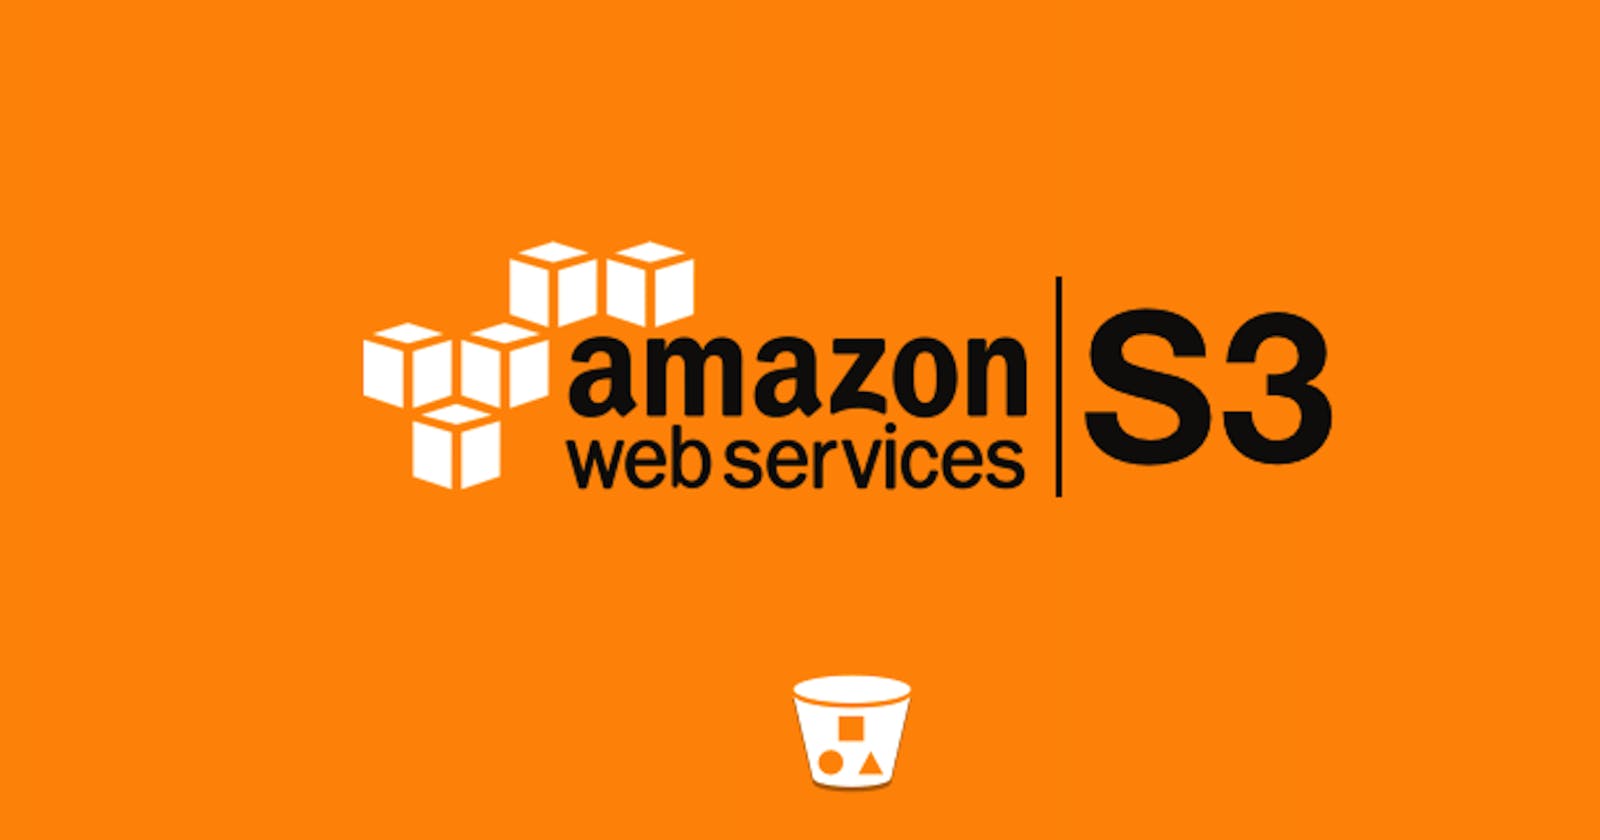 AWS S3 - old and evolving storage service